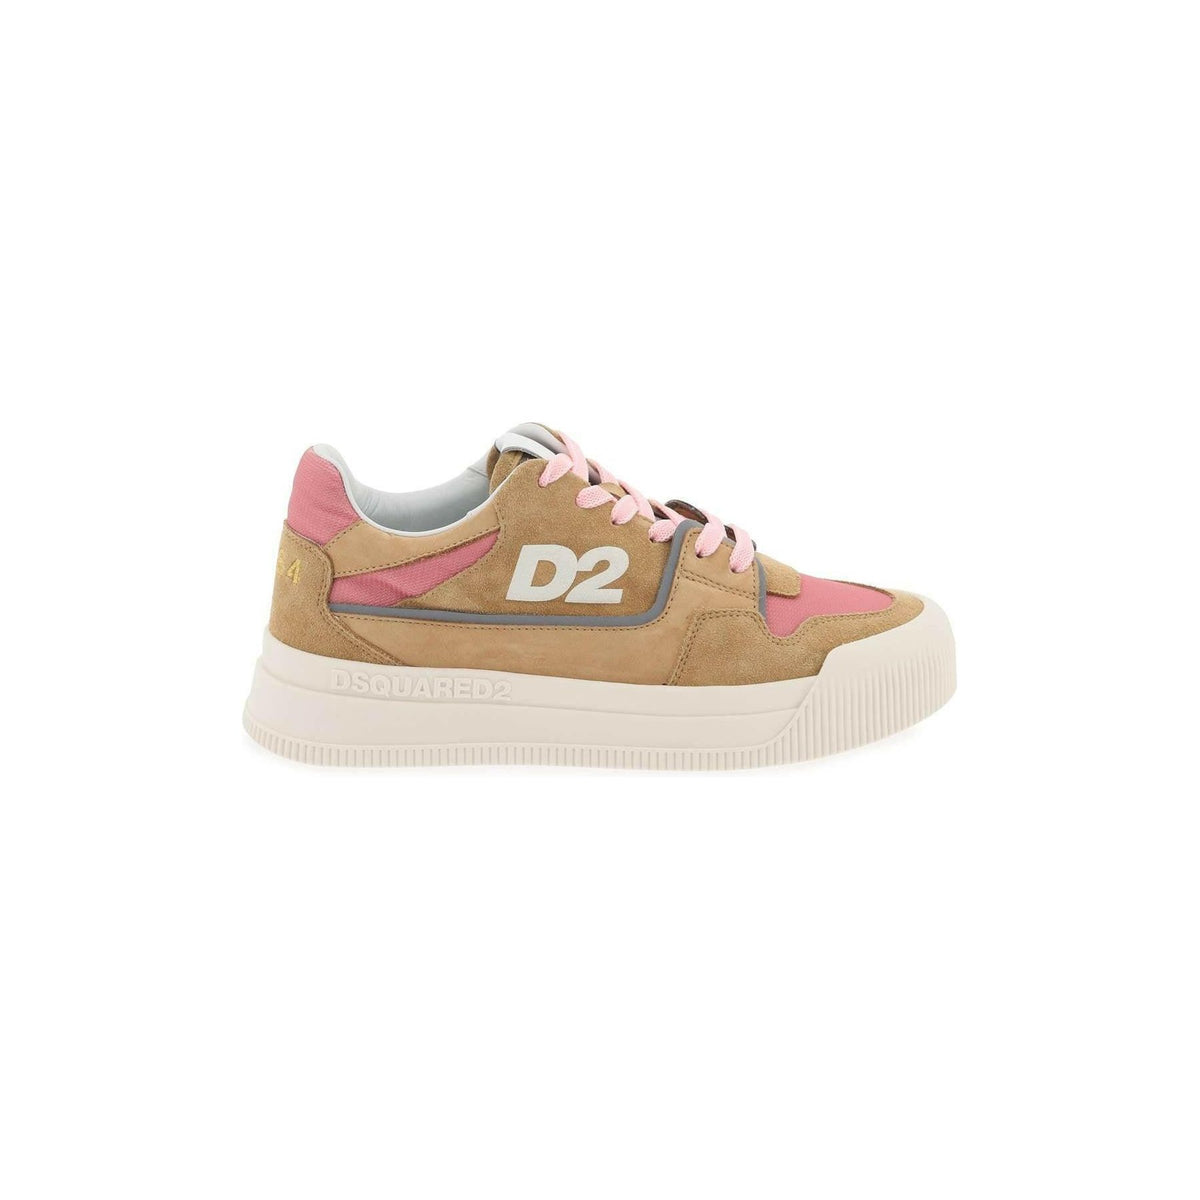 DSQUARED2 - Suede New Jersey Sneakers - JOHN JULIA